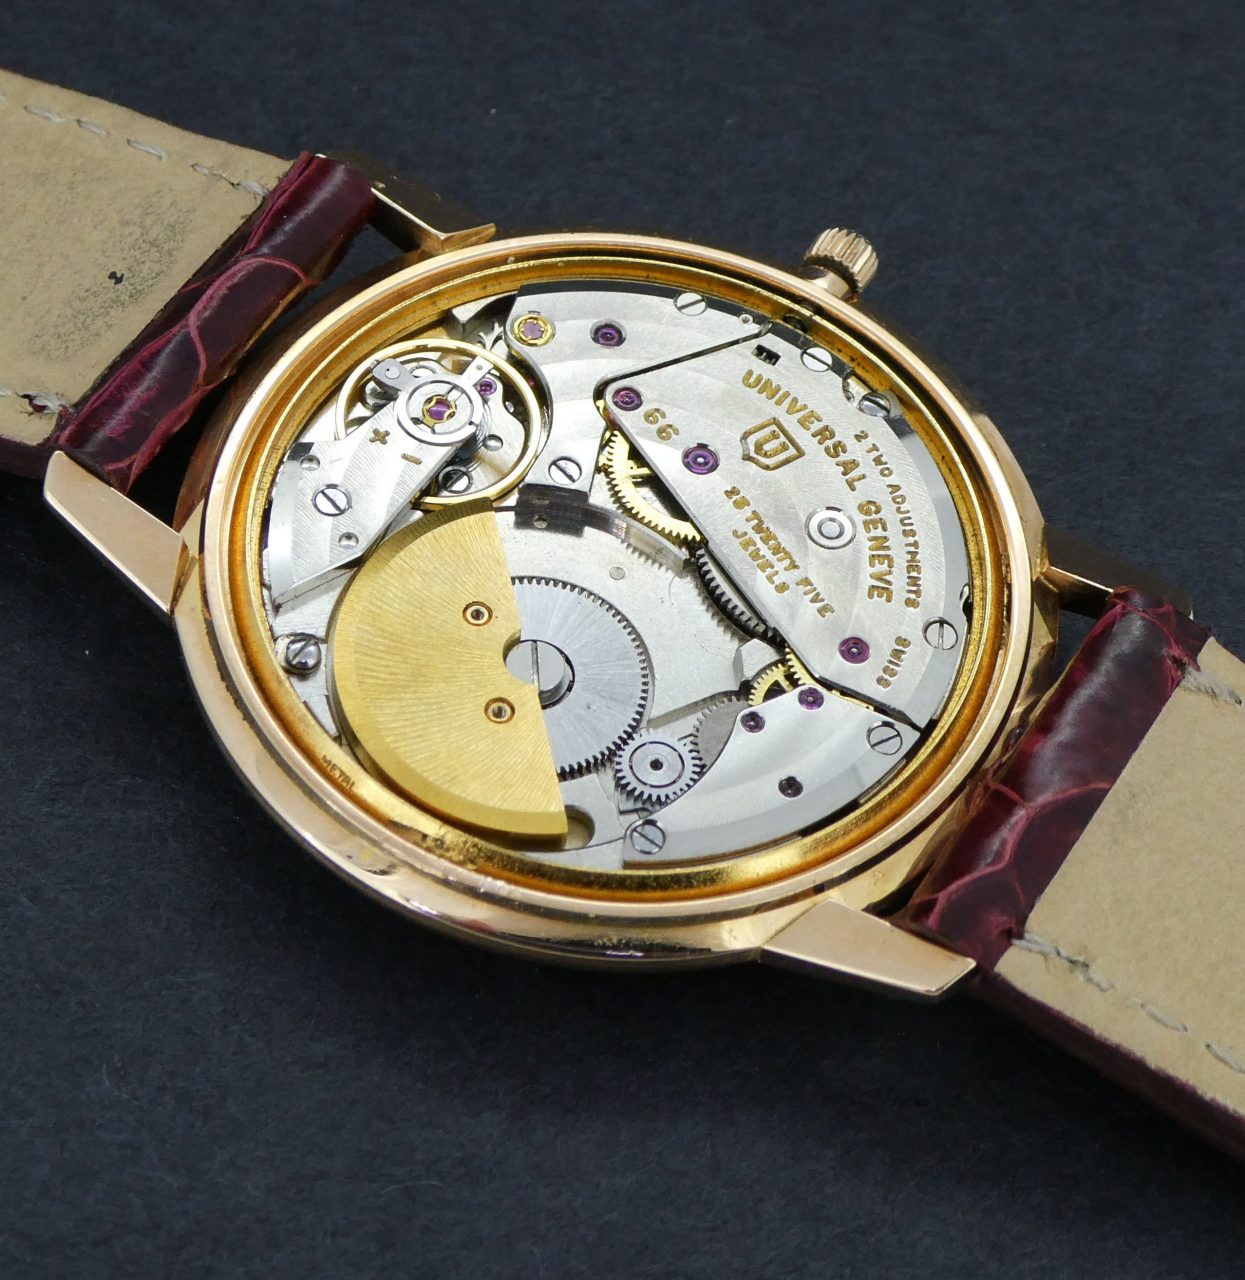 A Universal Genève micro-rotor movement - image by watchesoflancashire.com